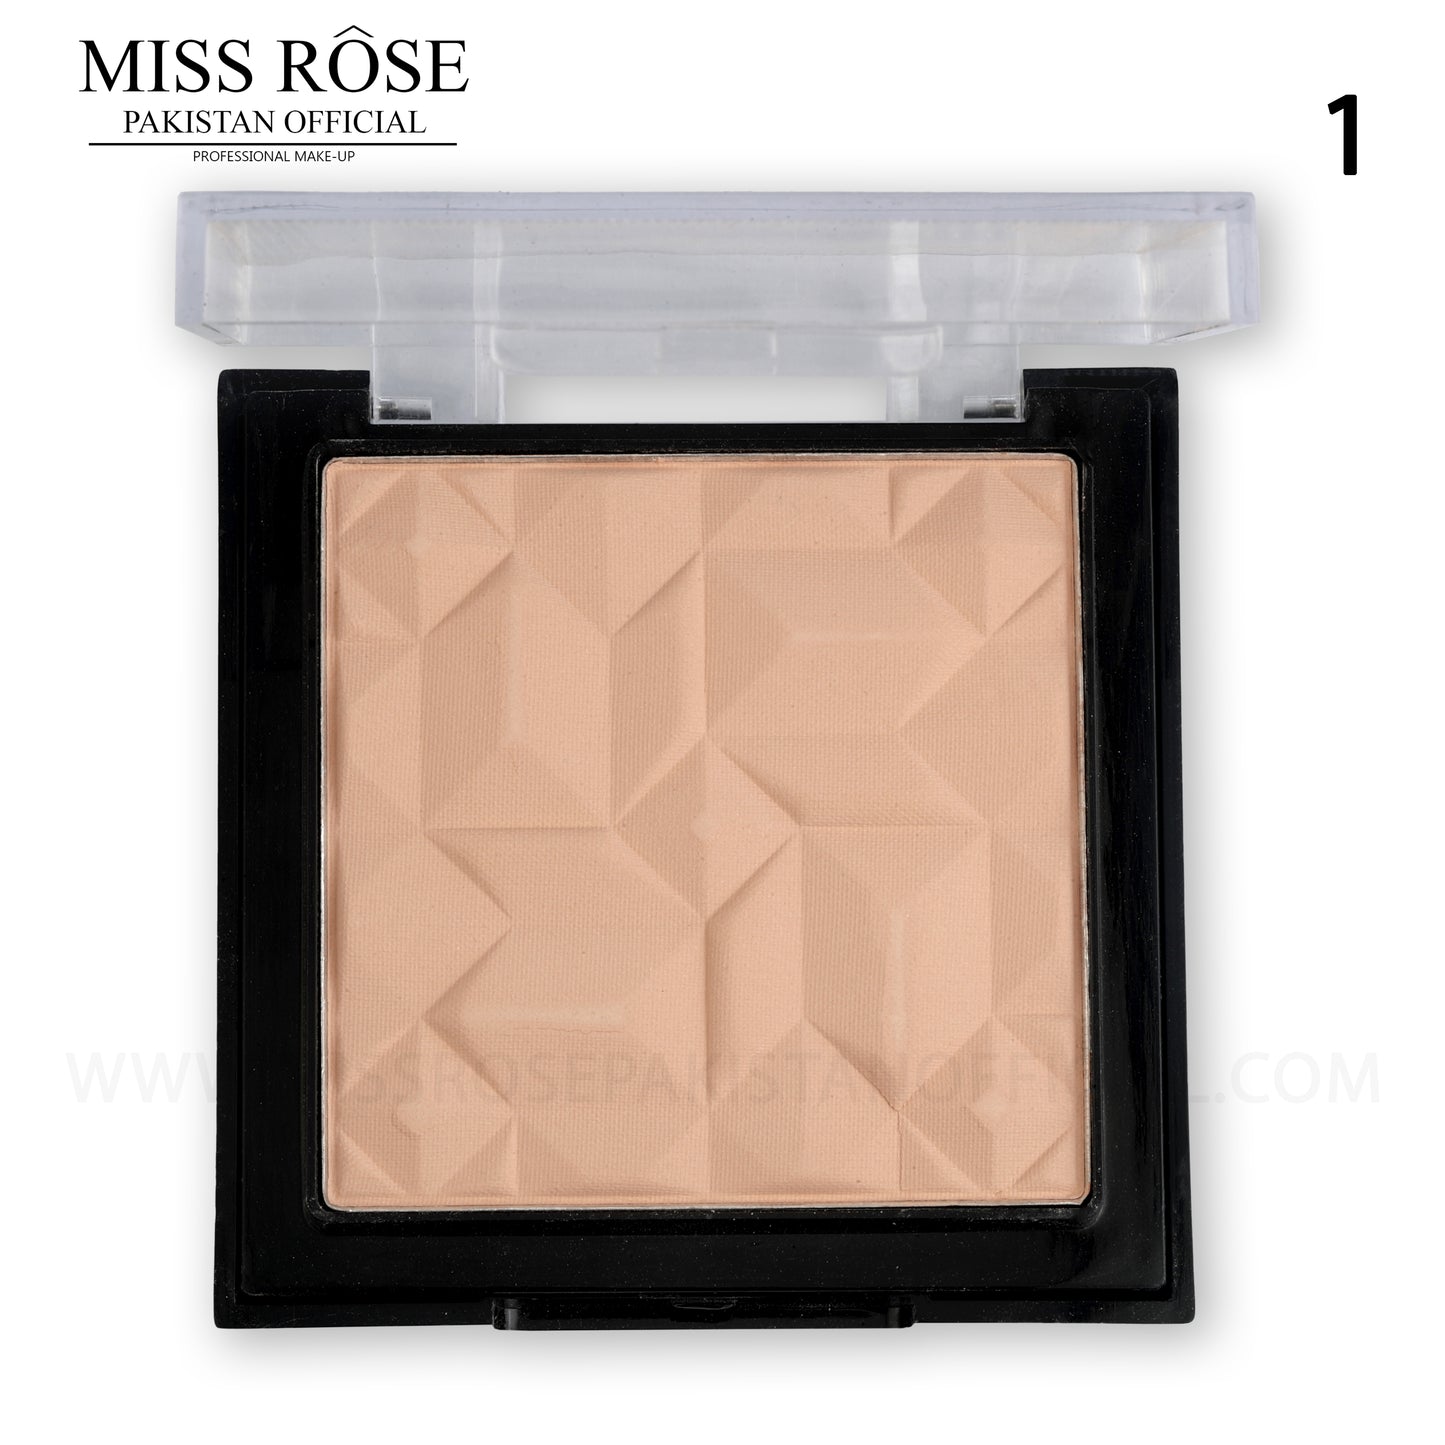 Miss Rose Square Compact